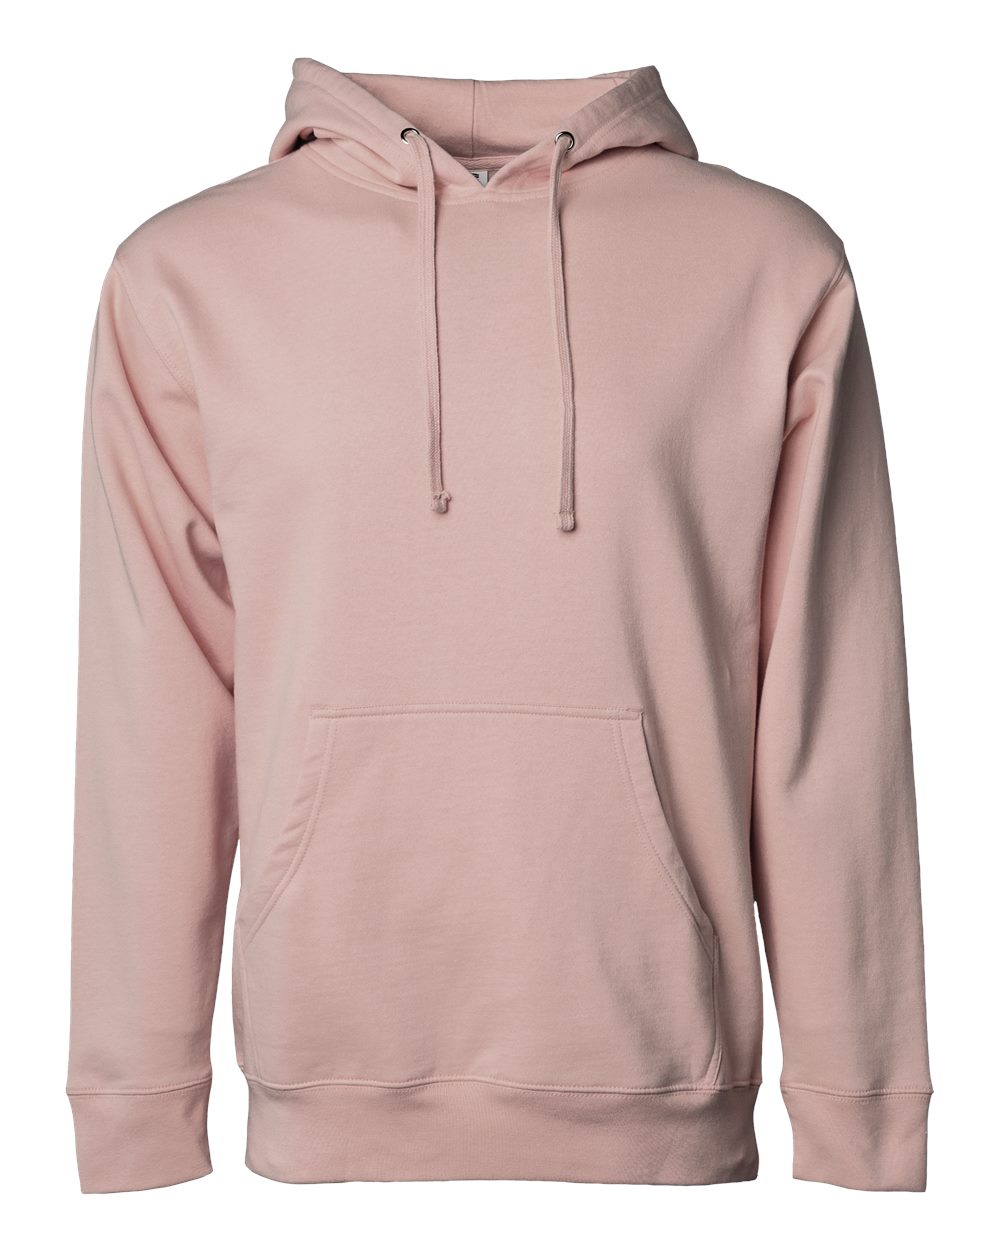 Independent Trading Co. SS4500 - Midweight Hooded Pullover Sweatshirt  $13.33 - Sweatshirts